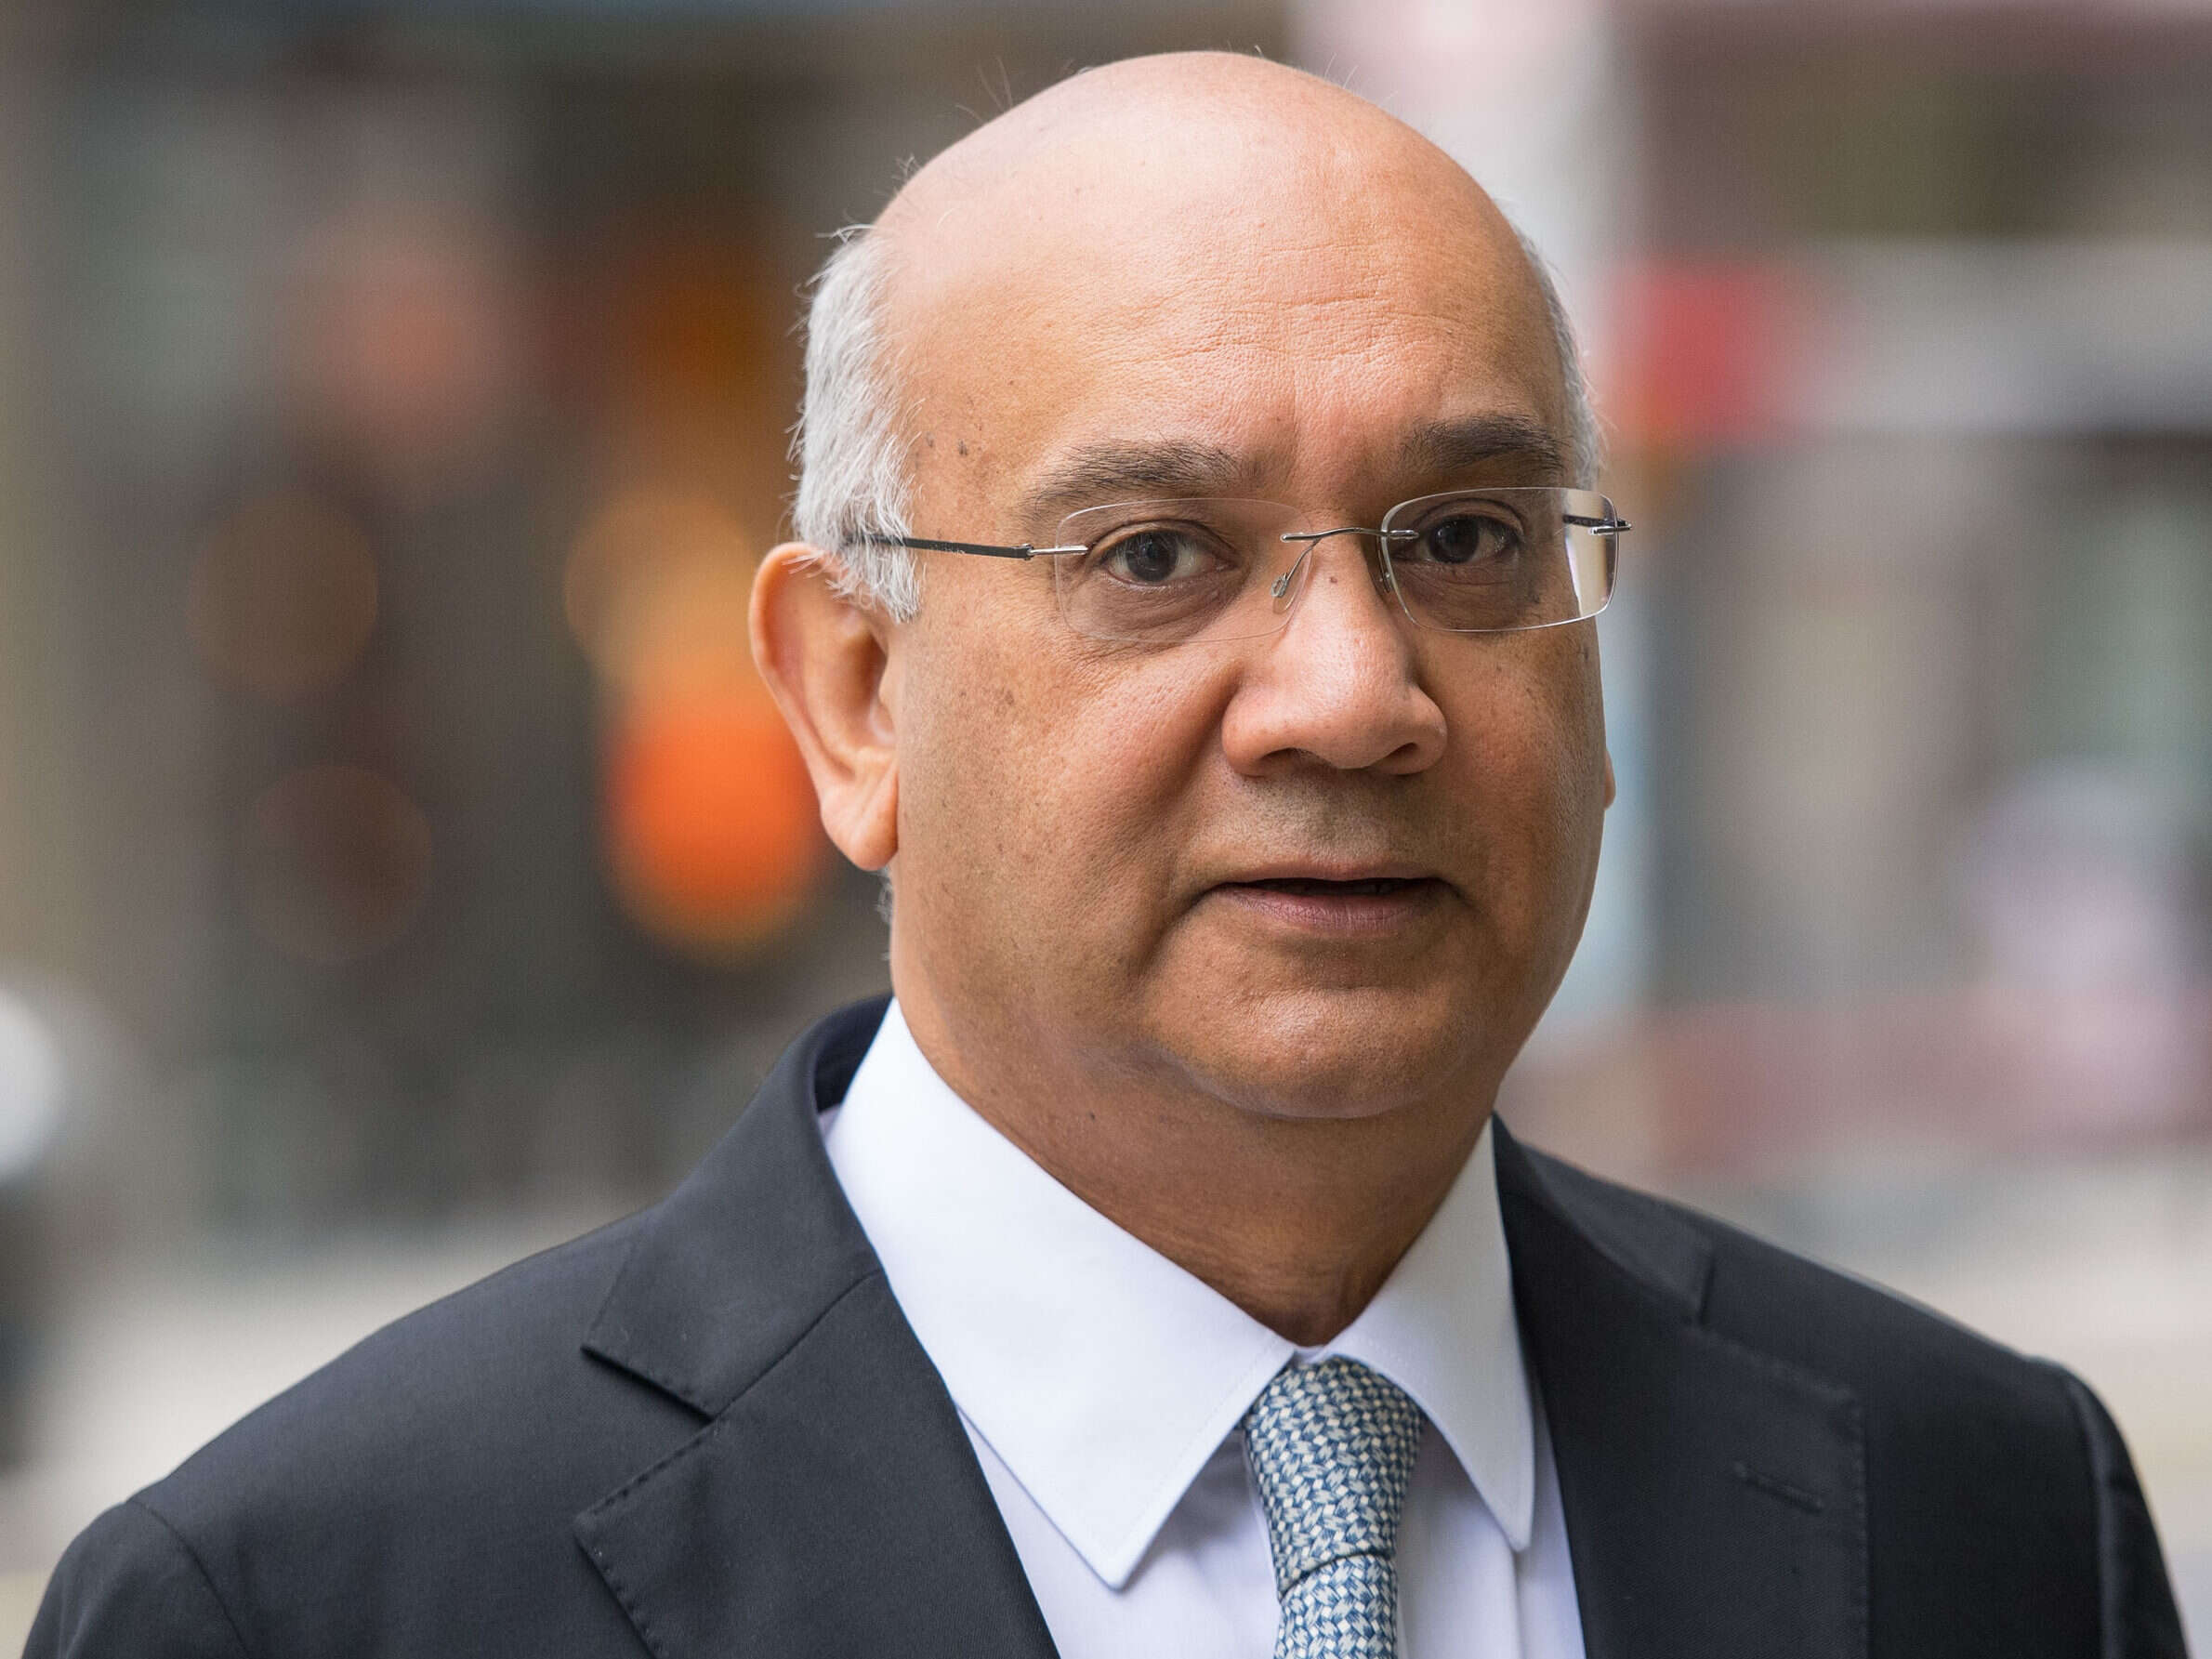 Labour's Keith Vaz facing Commons suspension for conduct exposed by Sunday Mirror